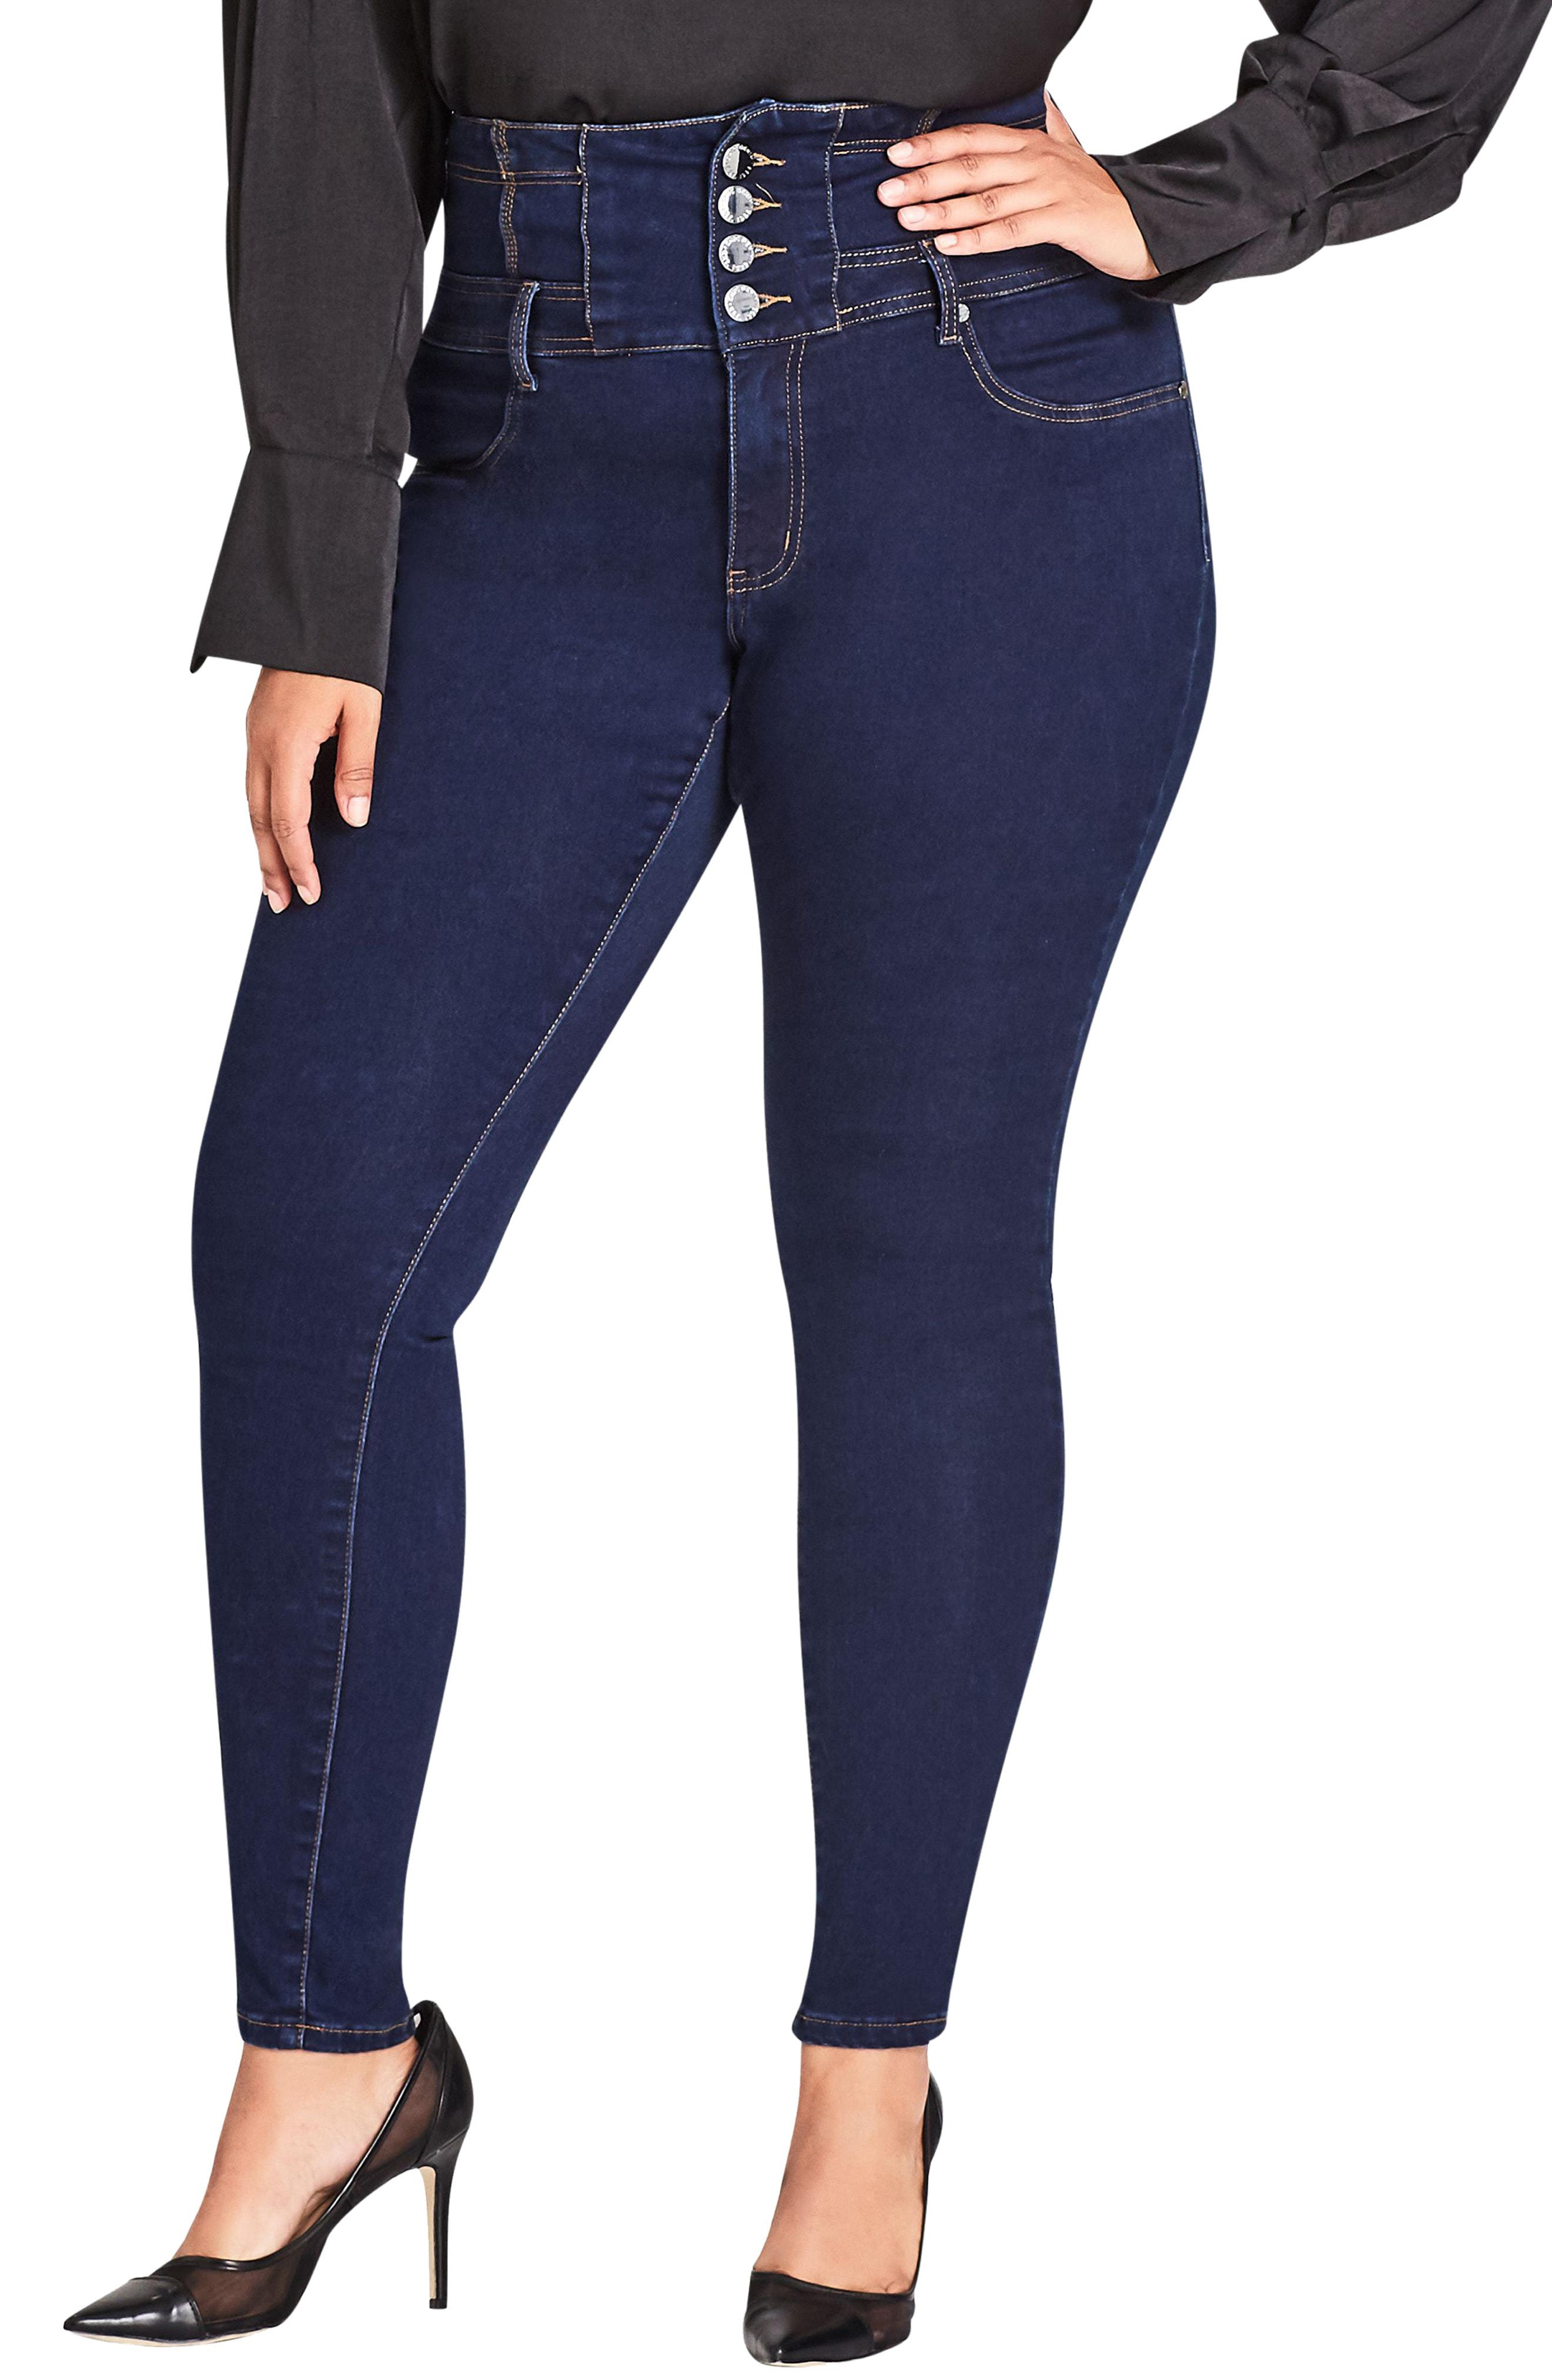 Lyst - City Chic Harley Corset Waist Stretch Skinny Jeans in Blue